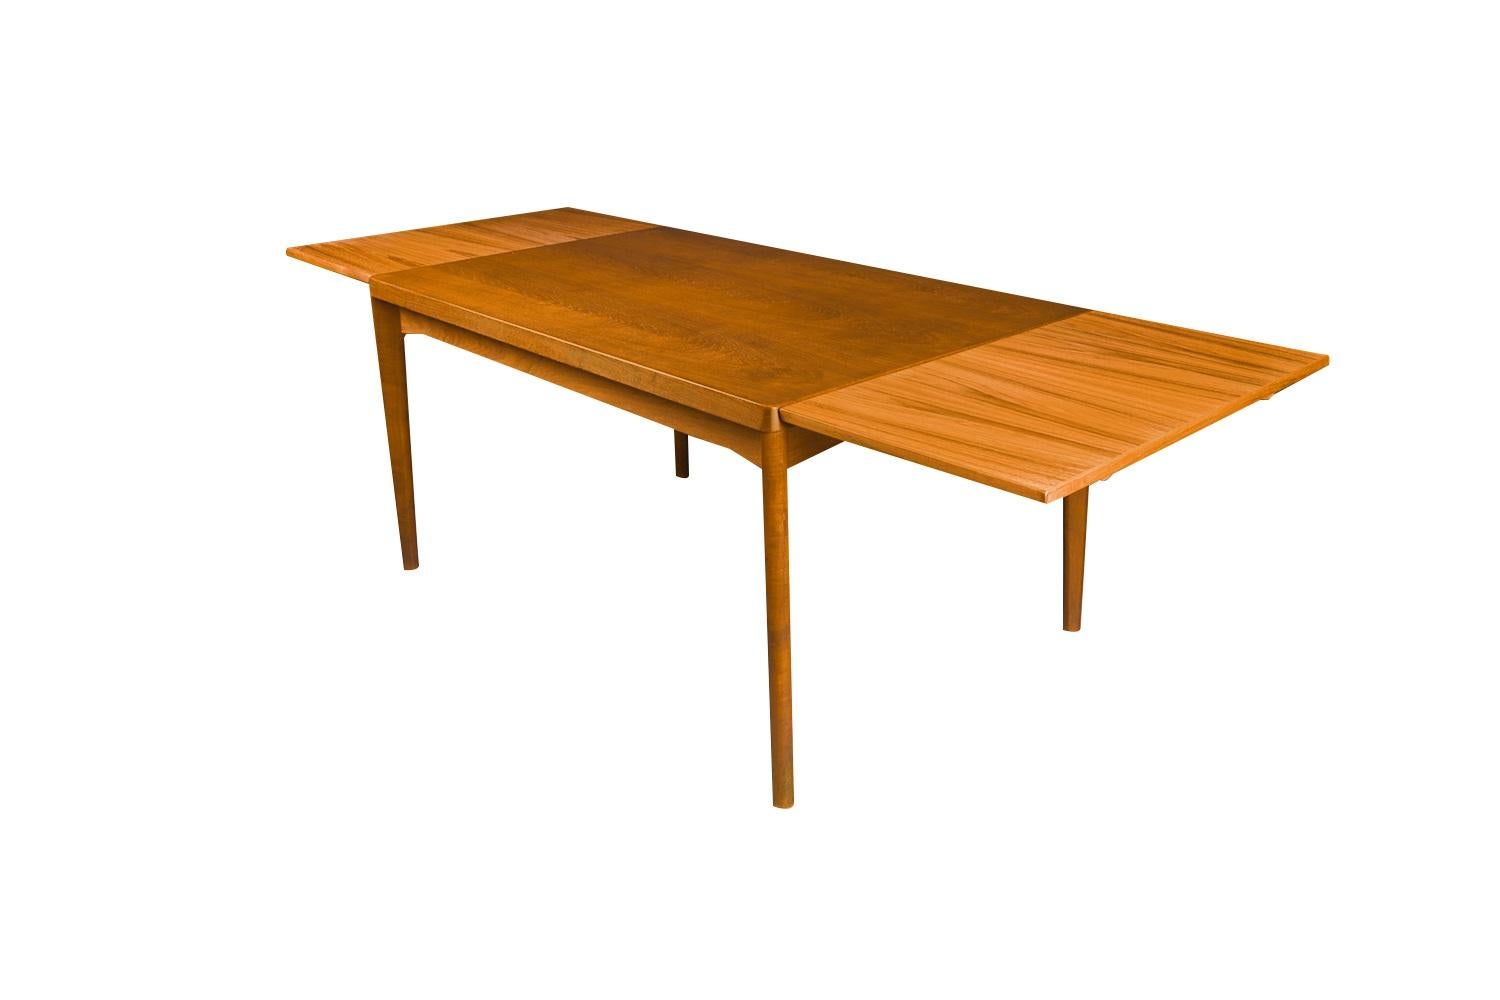 Exceptional Danish Modern teak extension dining table designed by Henning Kjaernulf for Vejle Stole og Møbelfabrik. With an initial large footprint, this table can also offer a generous space and double in size once its draw leaves are extended.